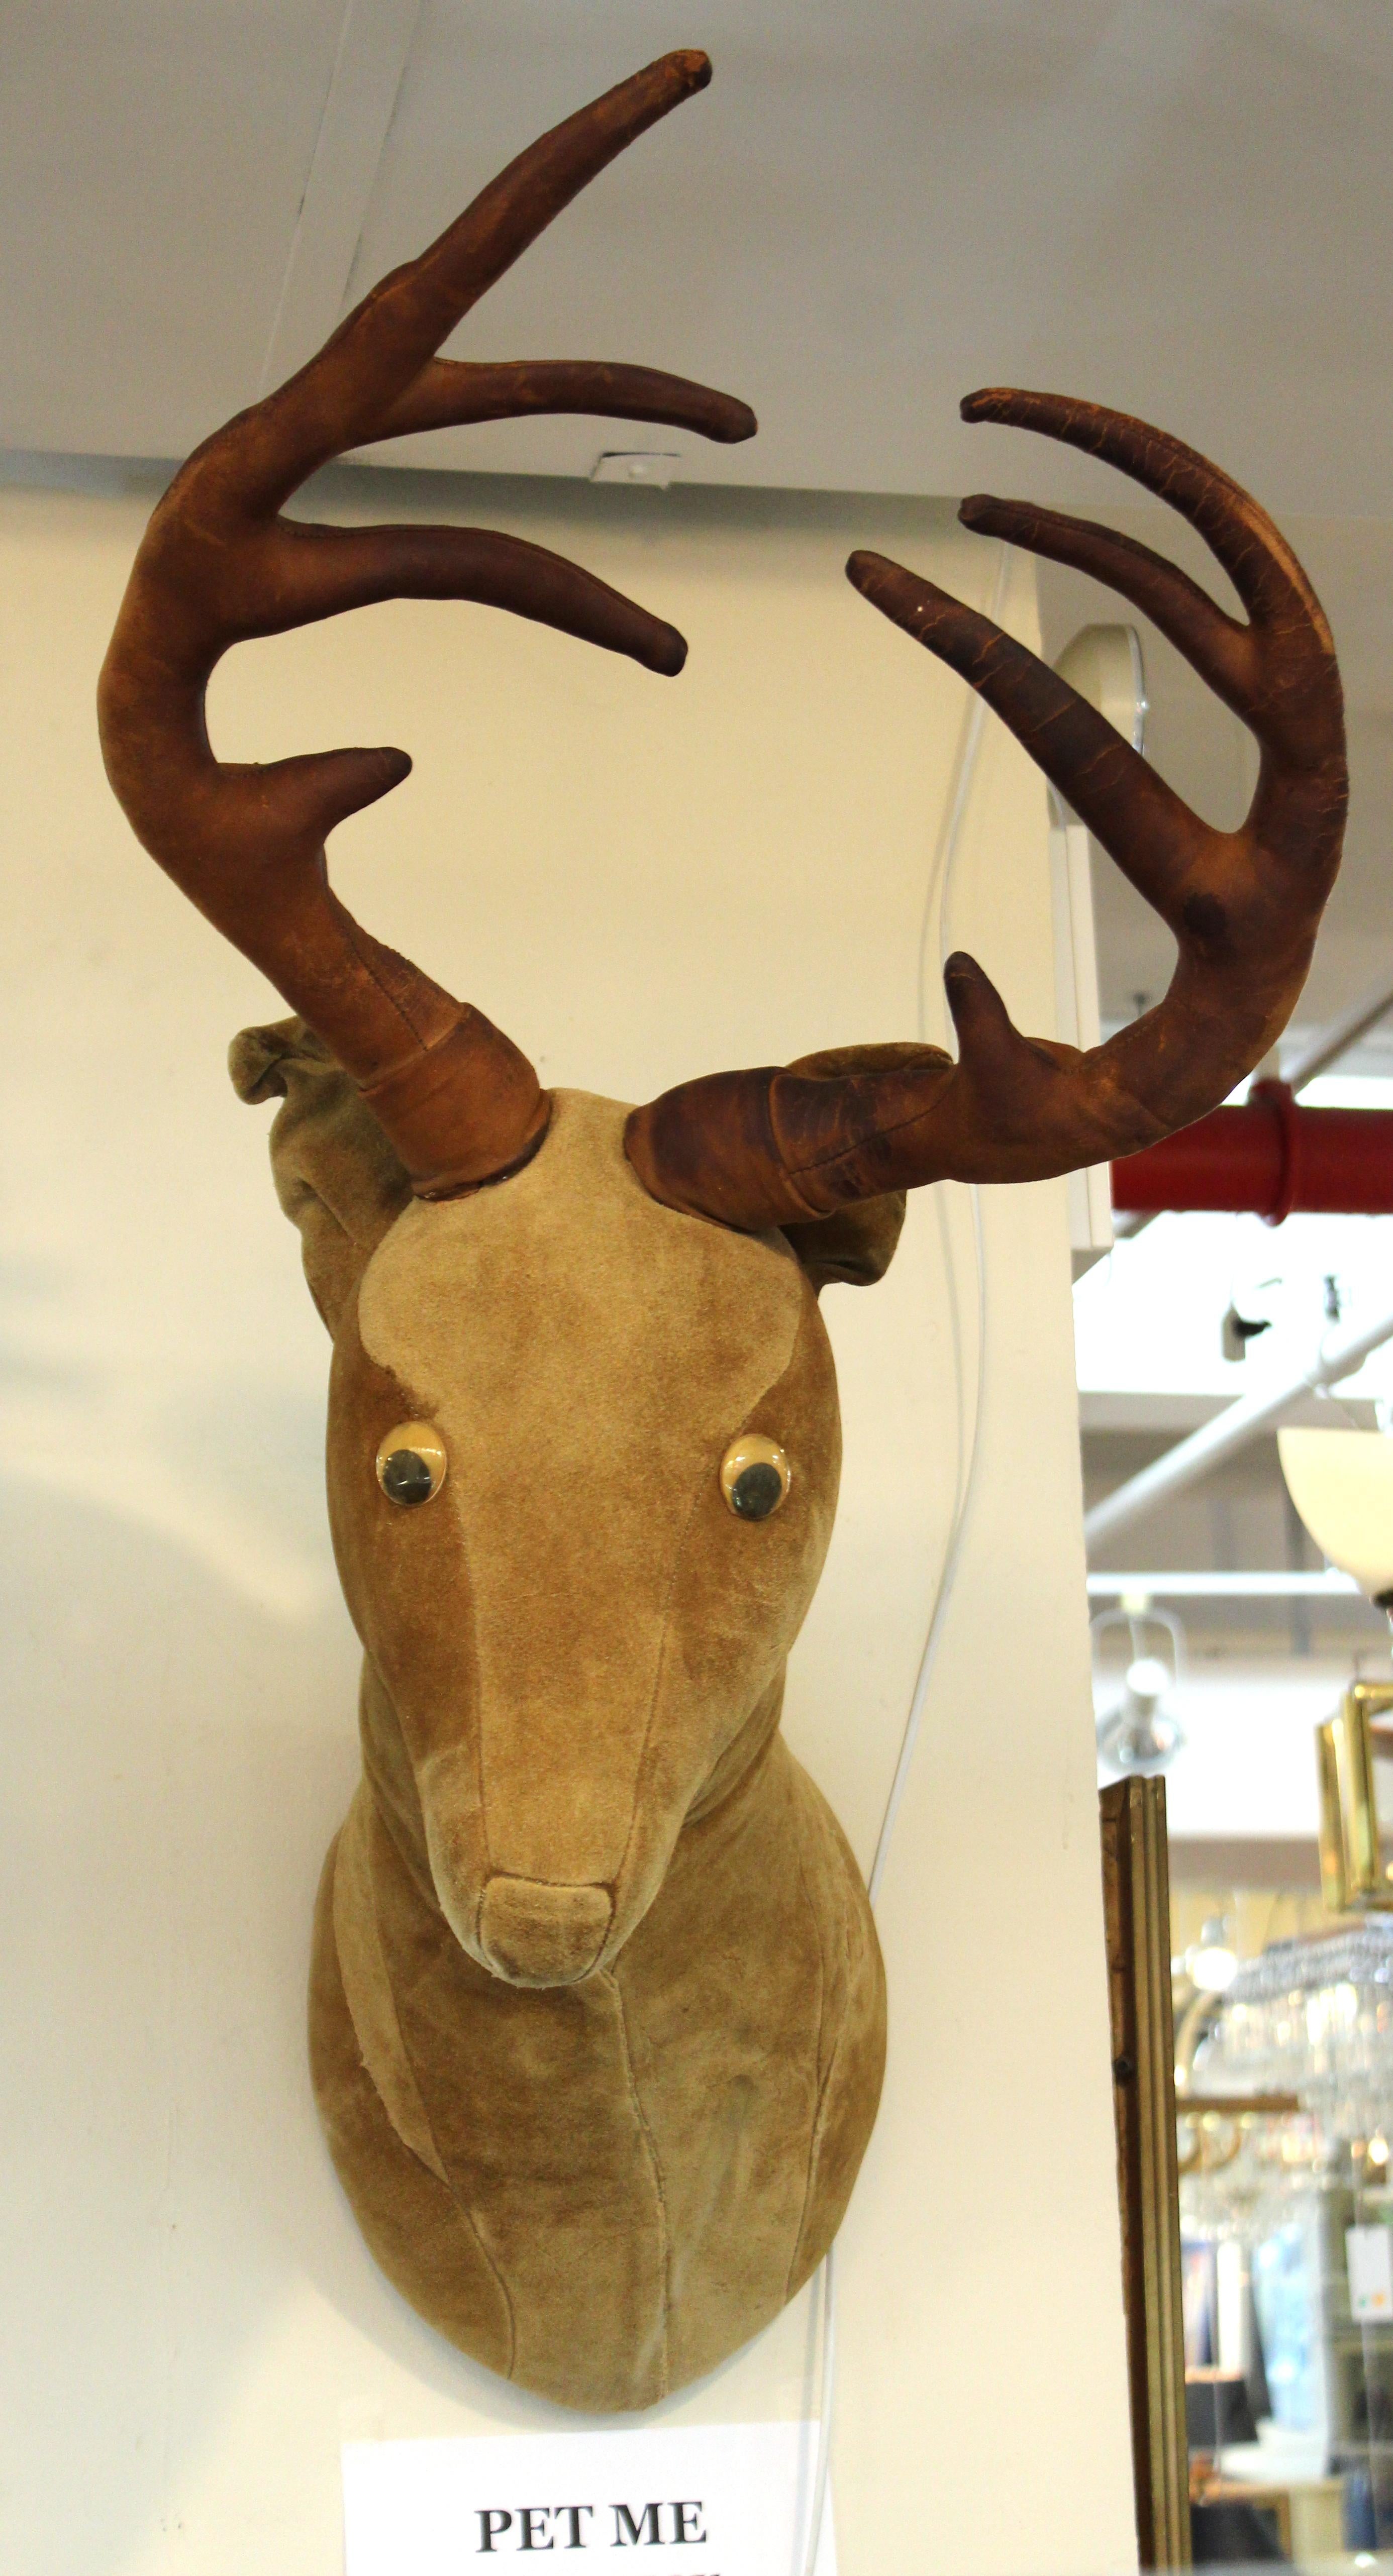 Mid-Century Modern wall-mounted deer head in leather upholstery with antlers and googly eyes. The piece is in great vintage condition with some age-appropriate wear to the leather surfaces and minor tarnish to the googly eyes.